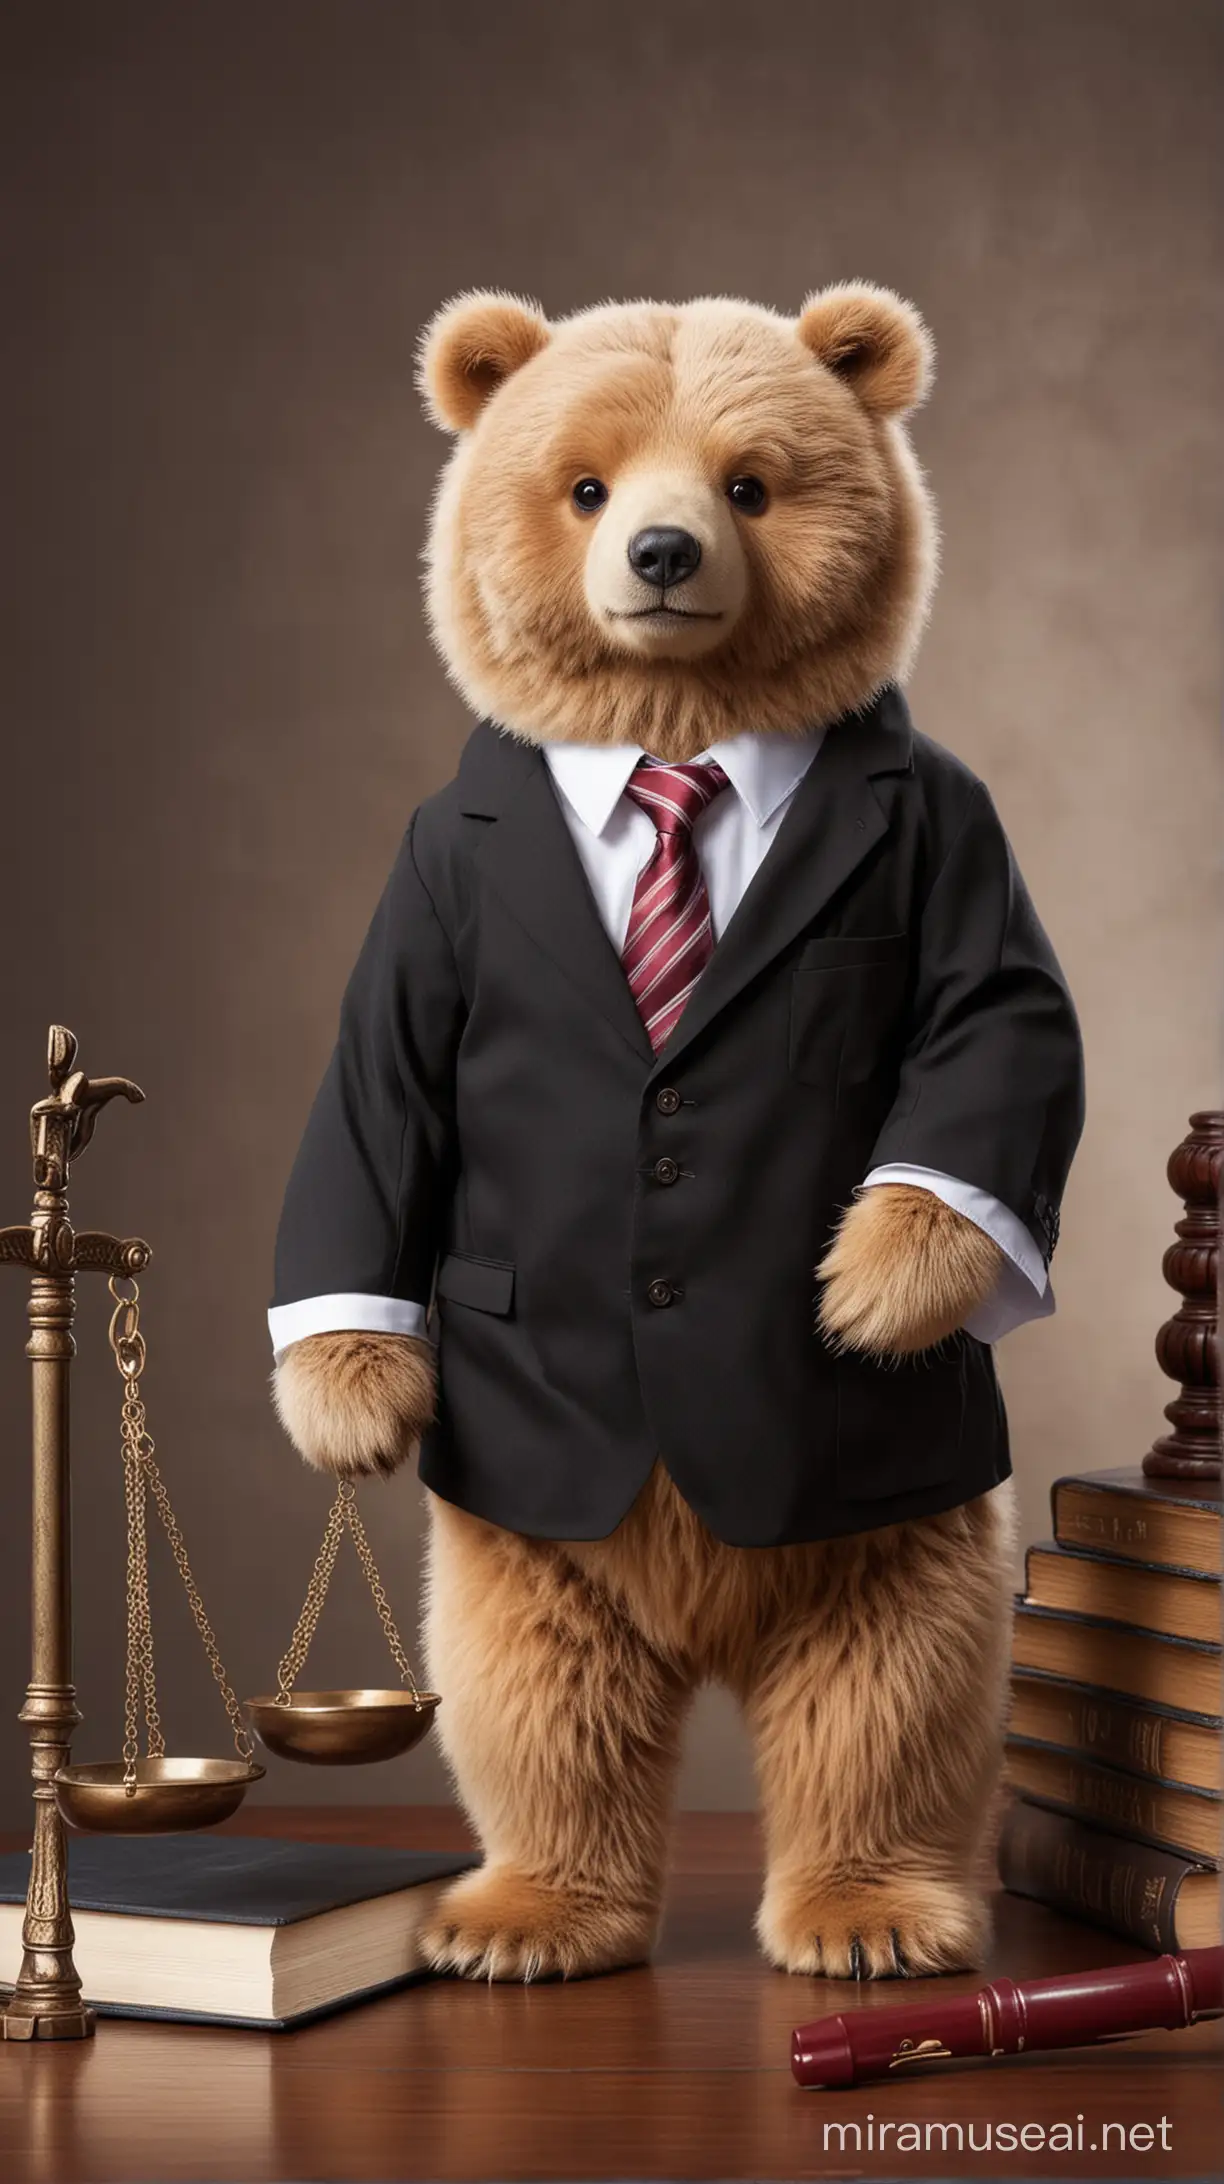 Adorable Bear Dressed as a Lawyer